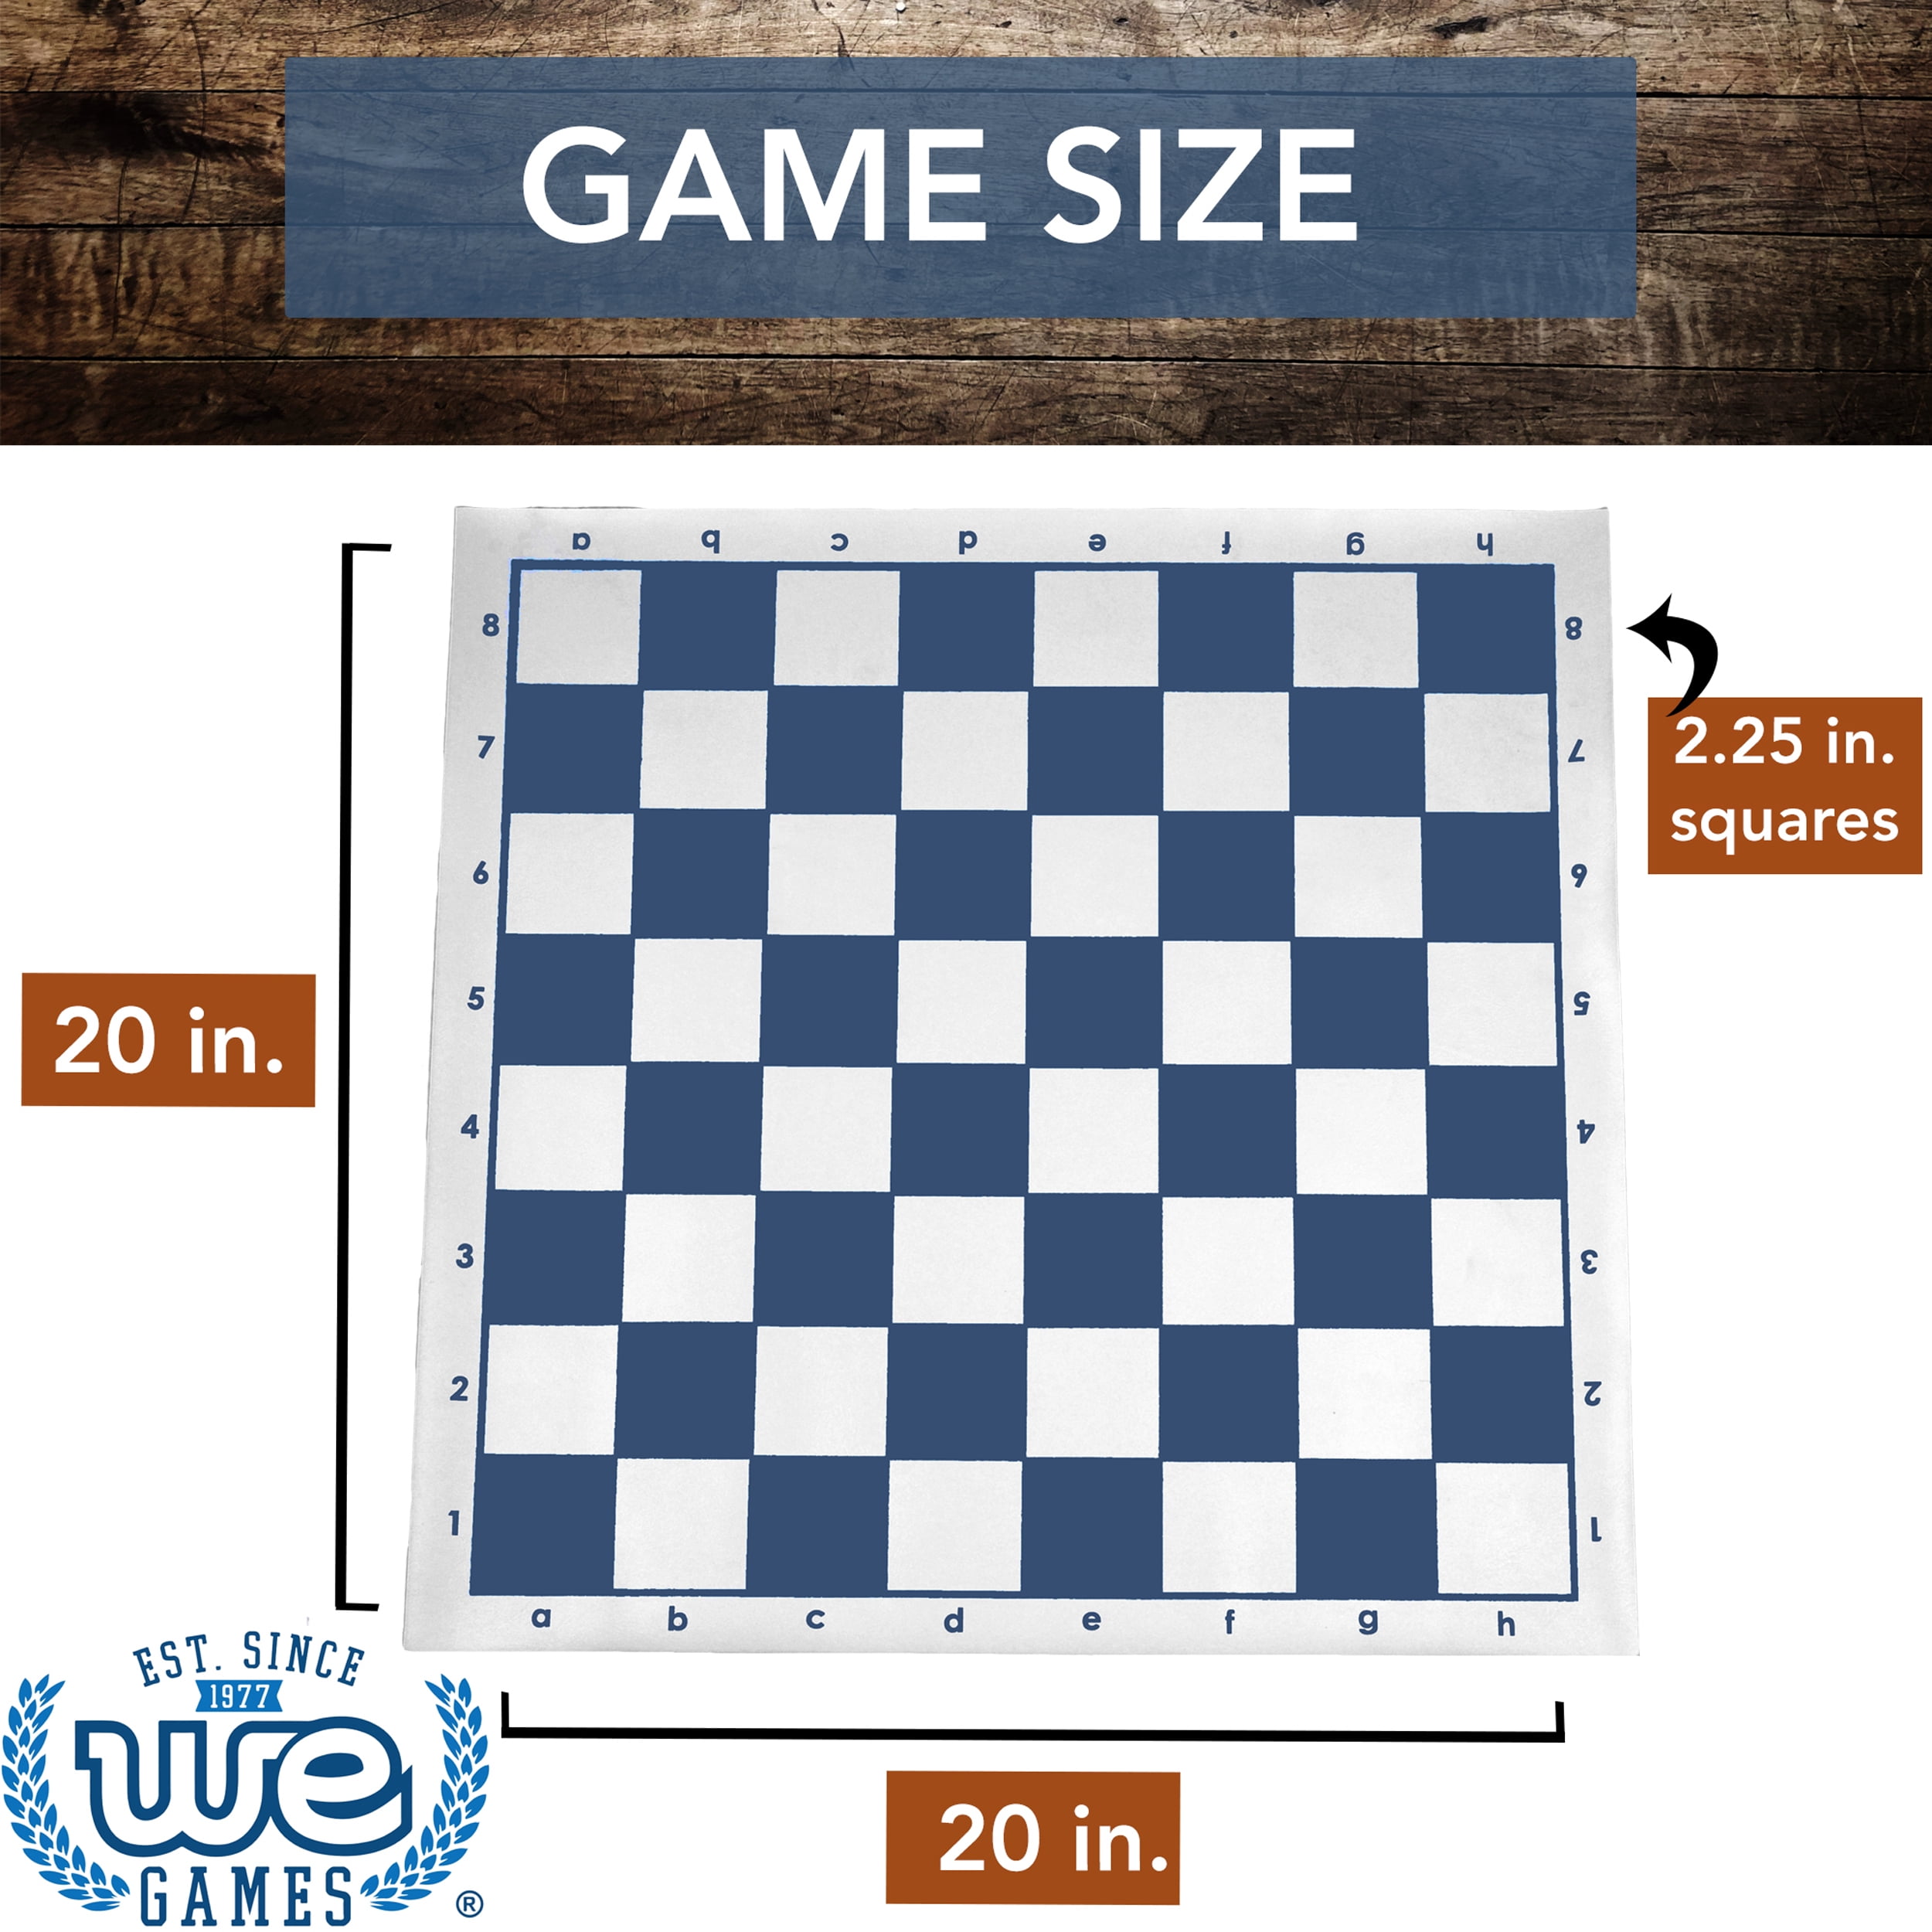 Tournament Chess Set - 34 Chess Pieces - Black Chess Board (20 x 20 Vinyl  Rollup) - DGT Black Easy Chess Timer Game Clock ChessCentral's Play Chess  - Have Fun! E-Book- 